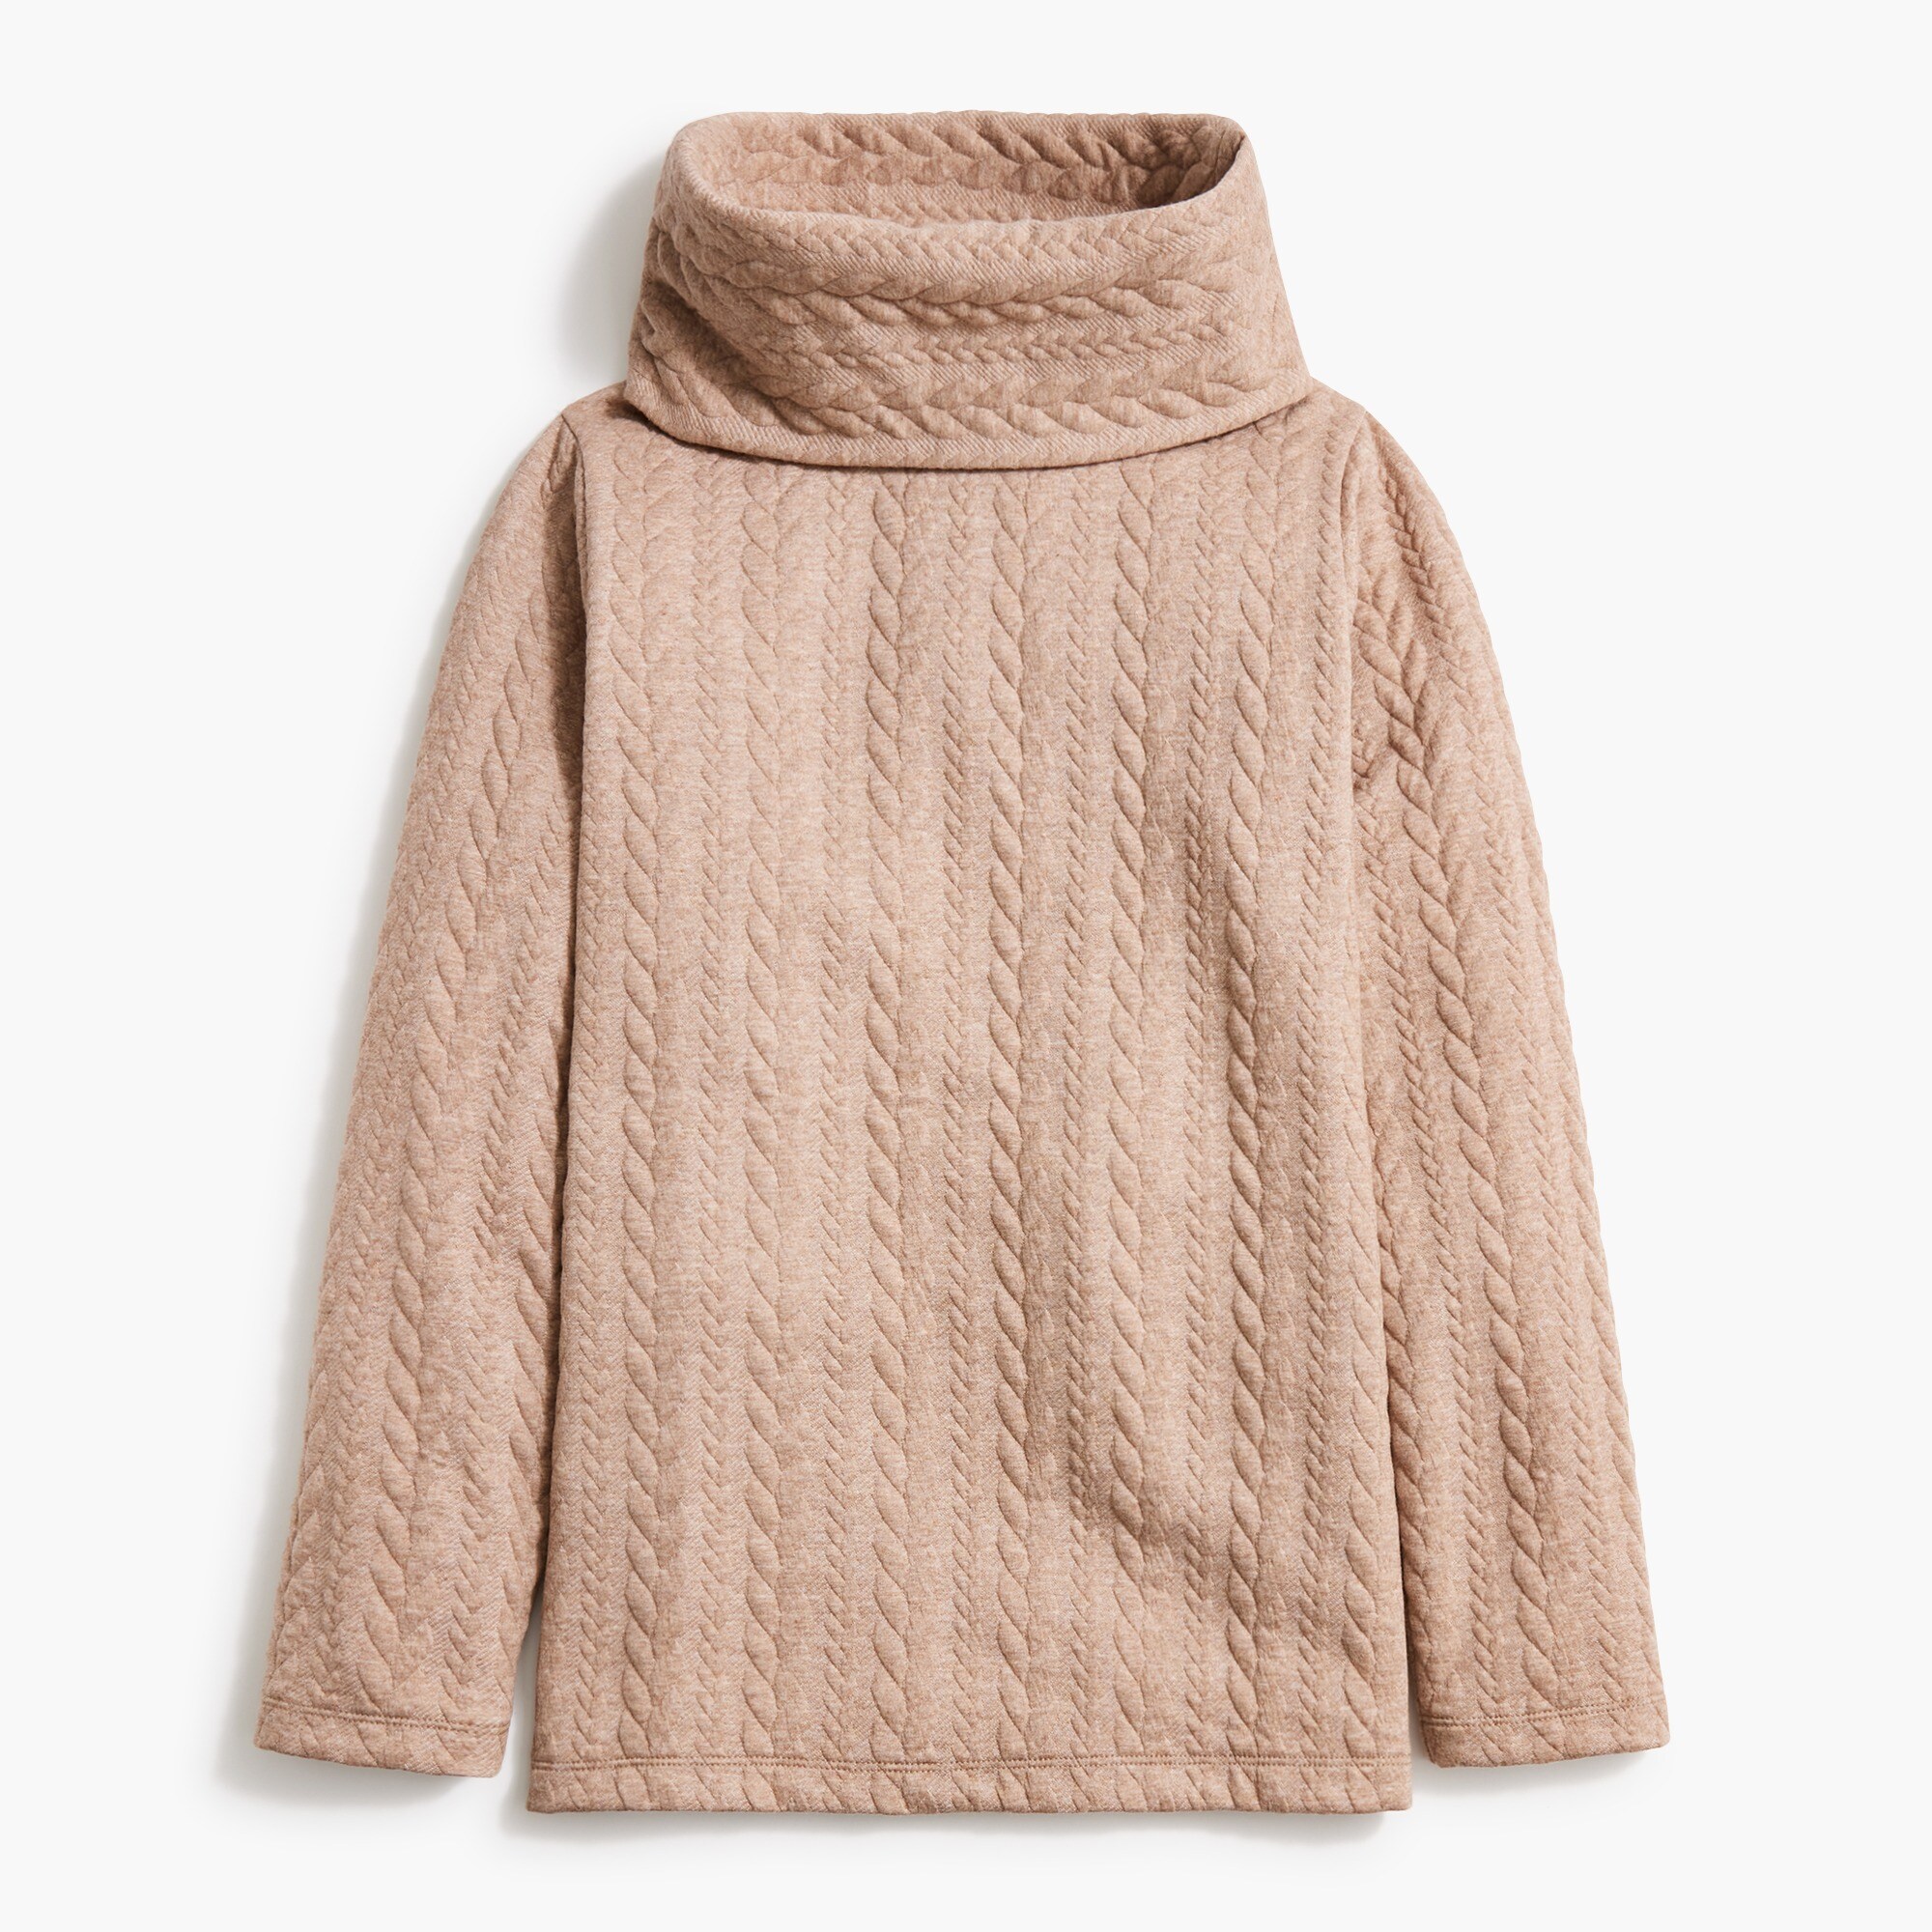  Cable-knit cowlneck top